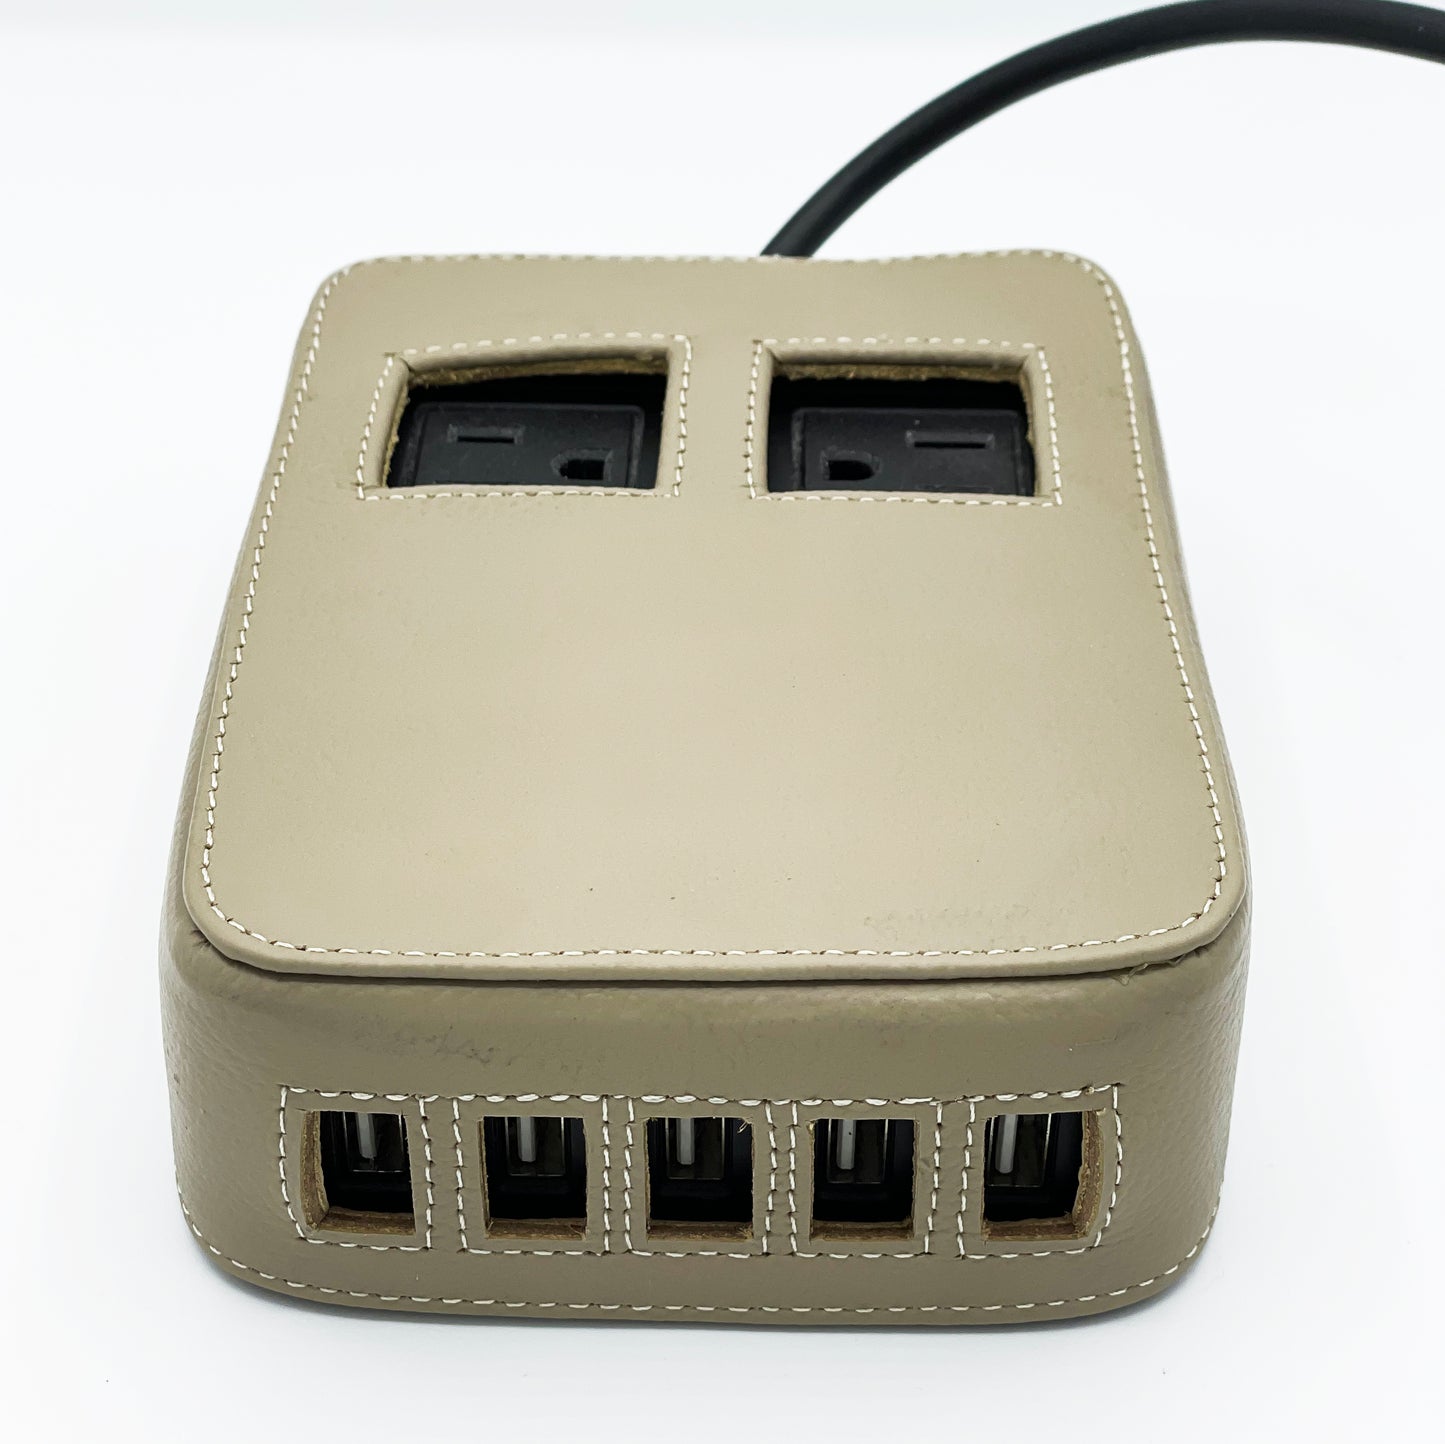 GUS Hospitality — Power Hub with Customizable Genuine Leather Cover